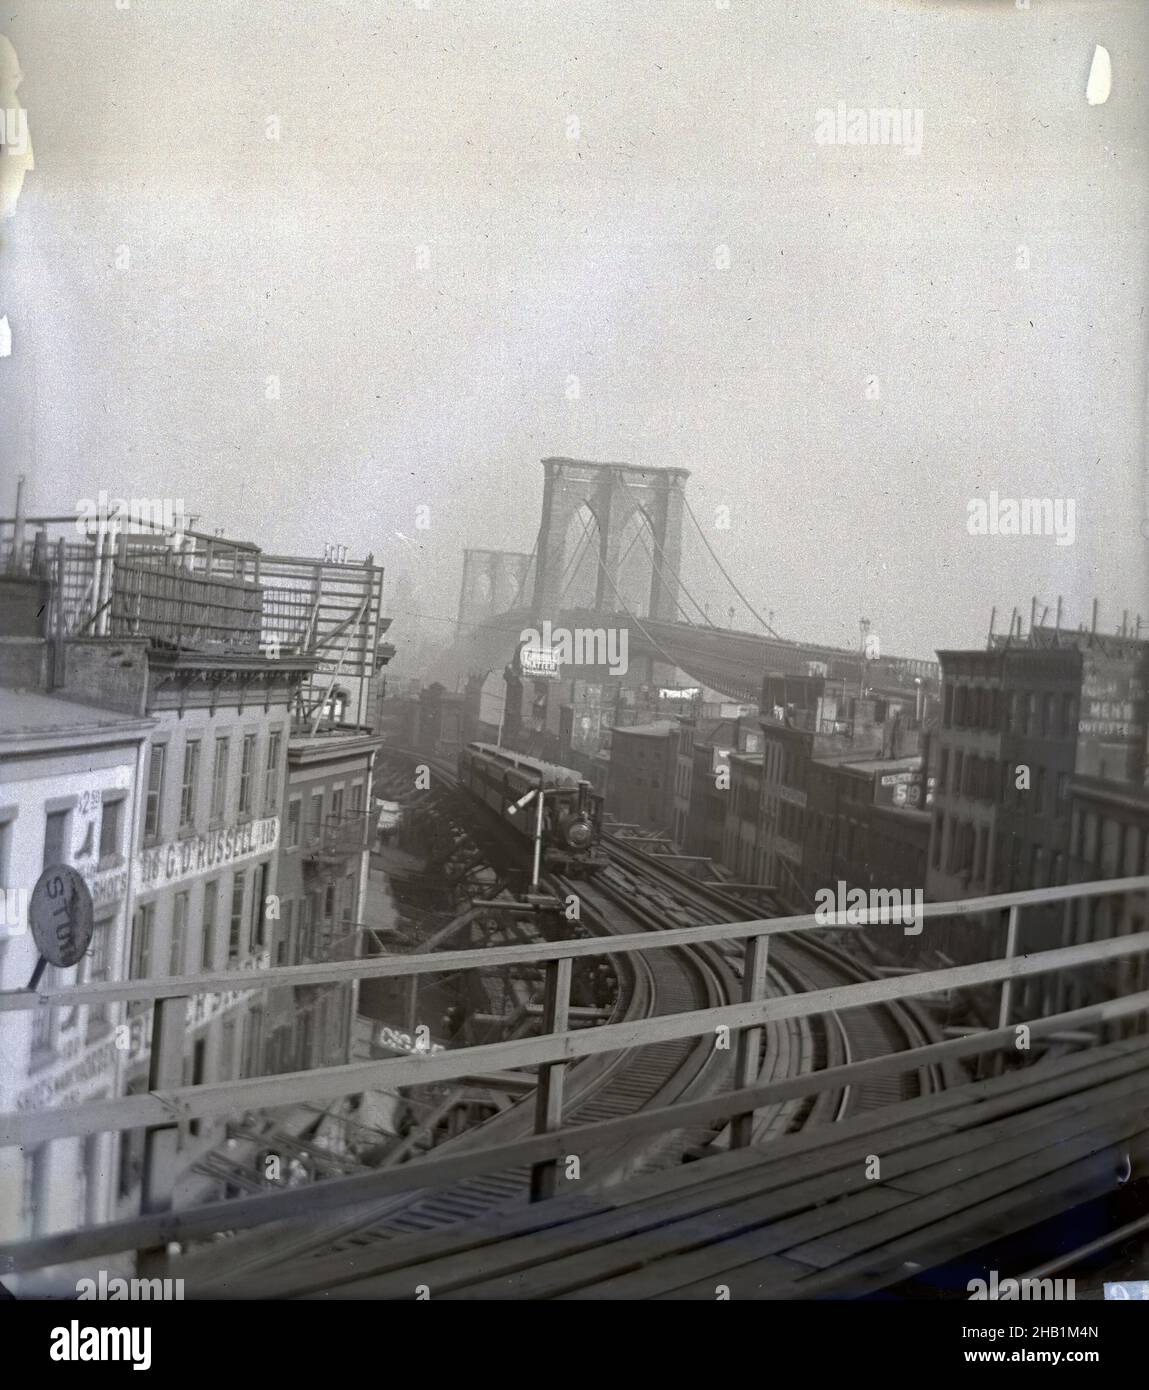 Brooklyn Bridge and Elevated Road to Fulton Ferry, Edgar S. Thomson, American, active 1890s-1900s, Glass plate negative, 1896, 4 x 5 in., 10.2 x 12.7 cm, architecture, archival photograph, Brooklyn Bridge, Brooklyn history, civil engineering, documentary photography, early photojournalism, East River, elevated, landmark, New York City, old Brooklyn, old New York, rails, subway, suspension bridge, tower, tracks, transportation Stock Photo